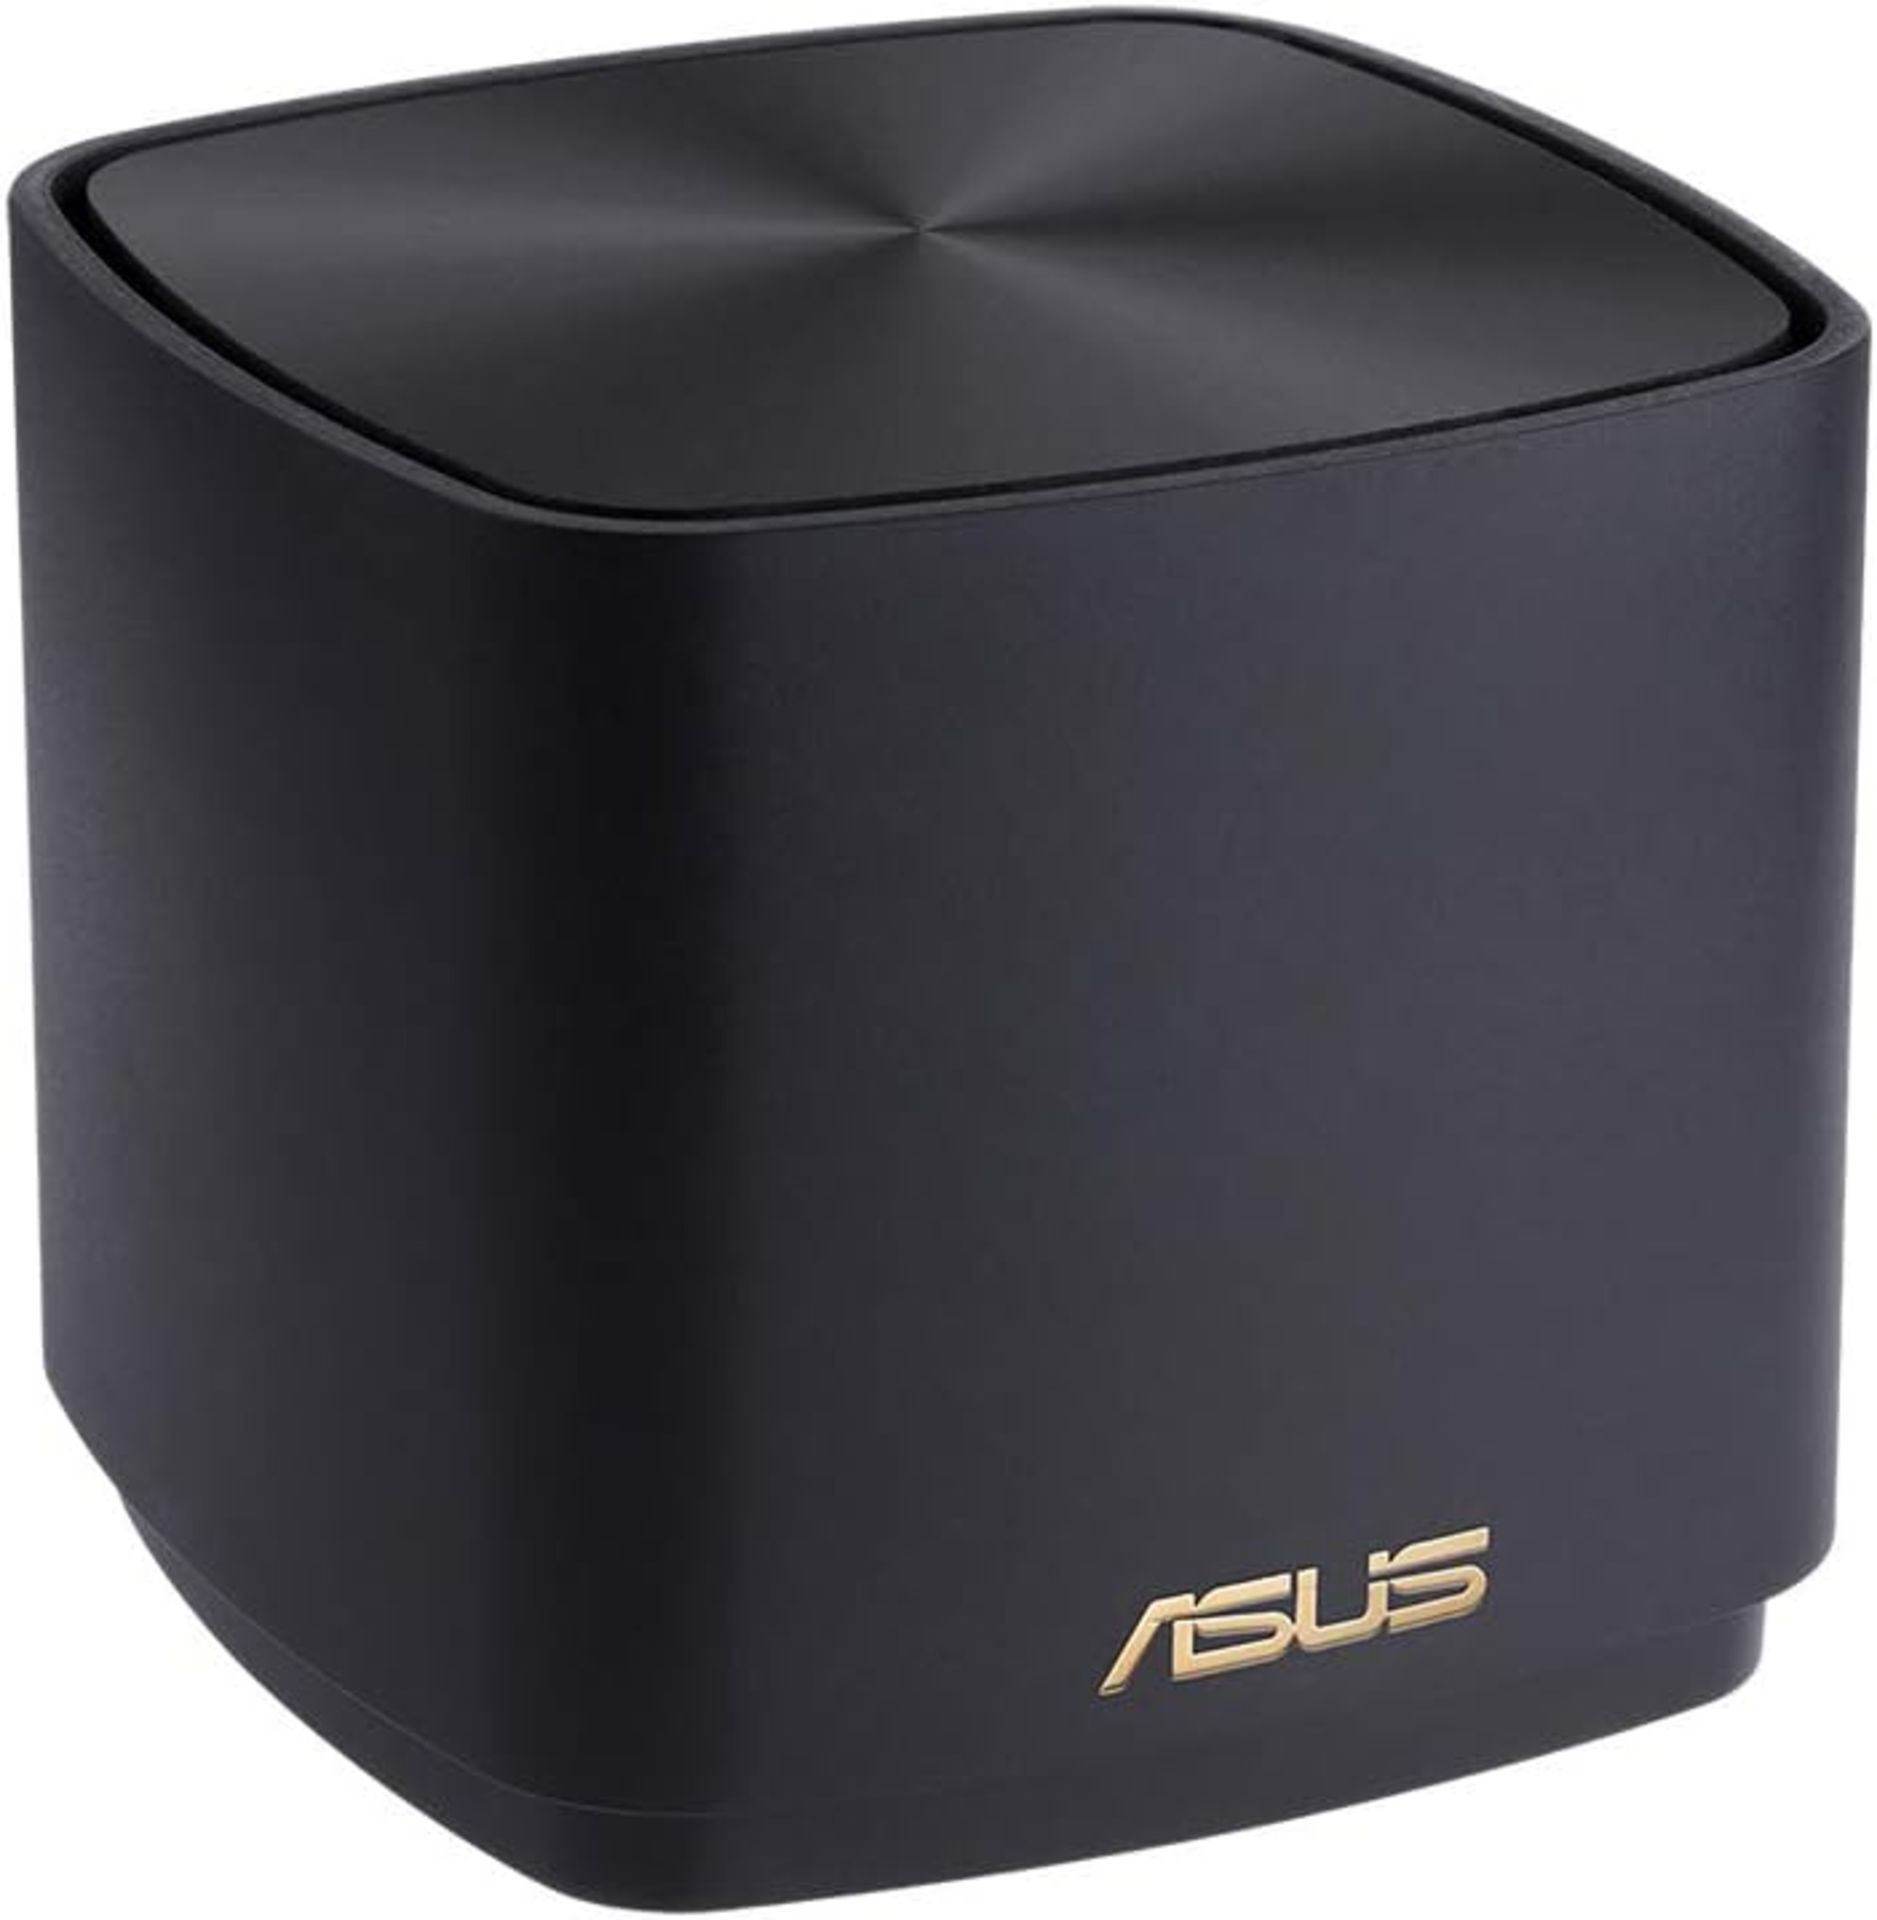 BRAND NEW FACTORY SEALED ASUS ZenWiFi AX XD4 WiFi 6 Mesh System - 2 Pack - Black. RRP £167. The - Image 6 of 6